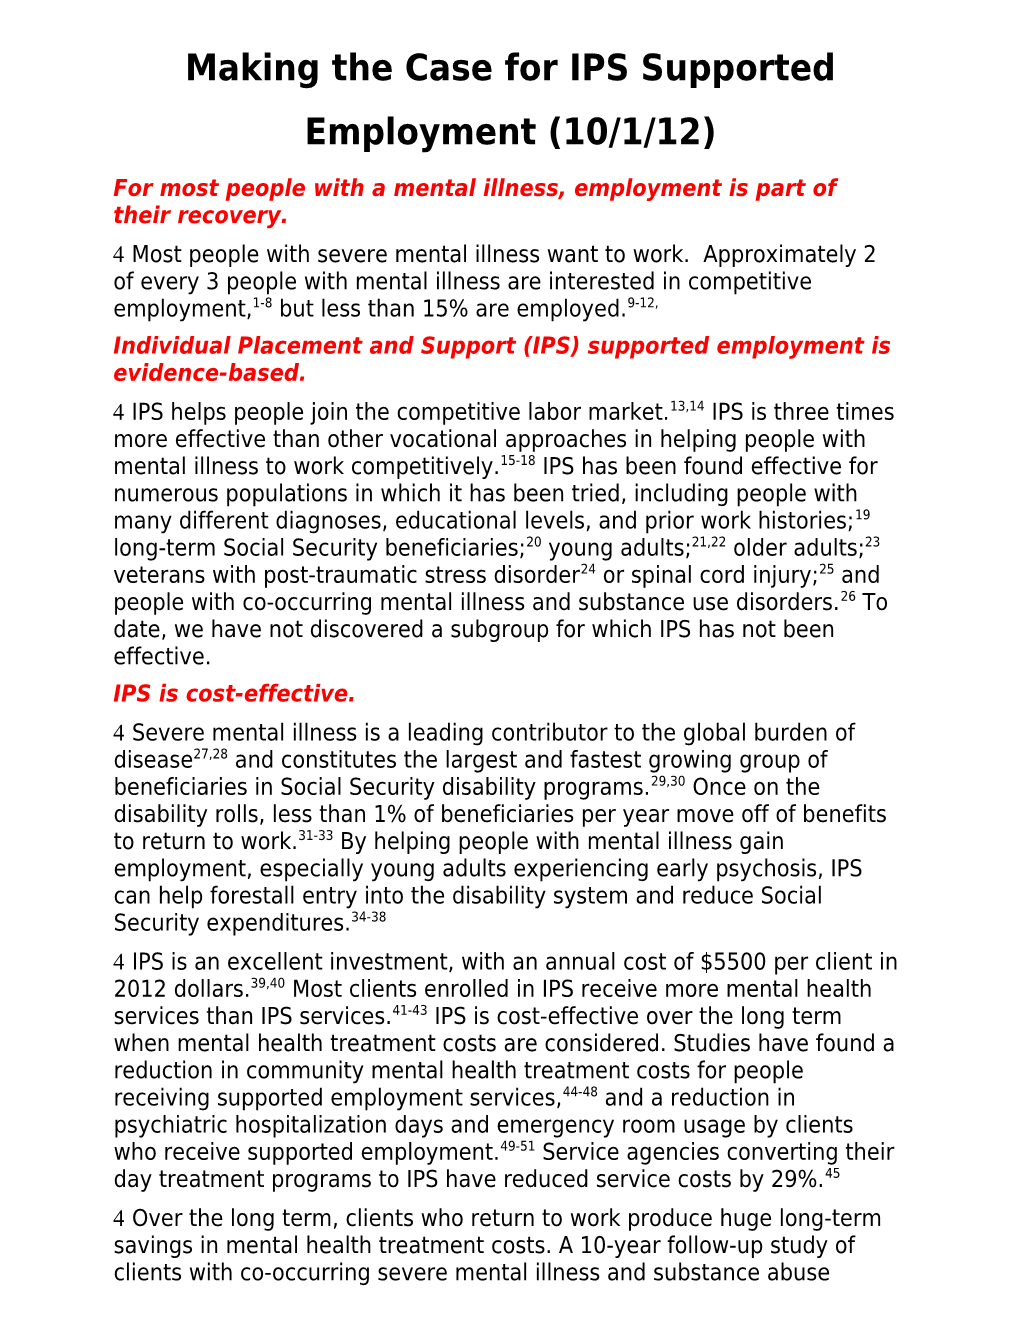 Making the Case for IPS Supported Employment (10/1/12)